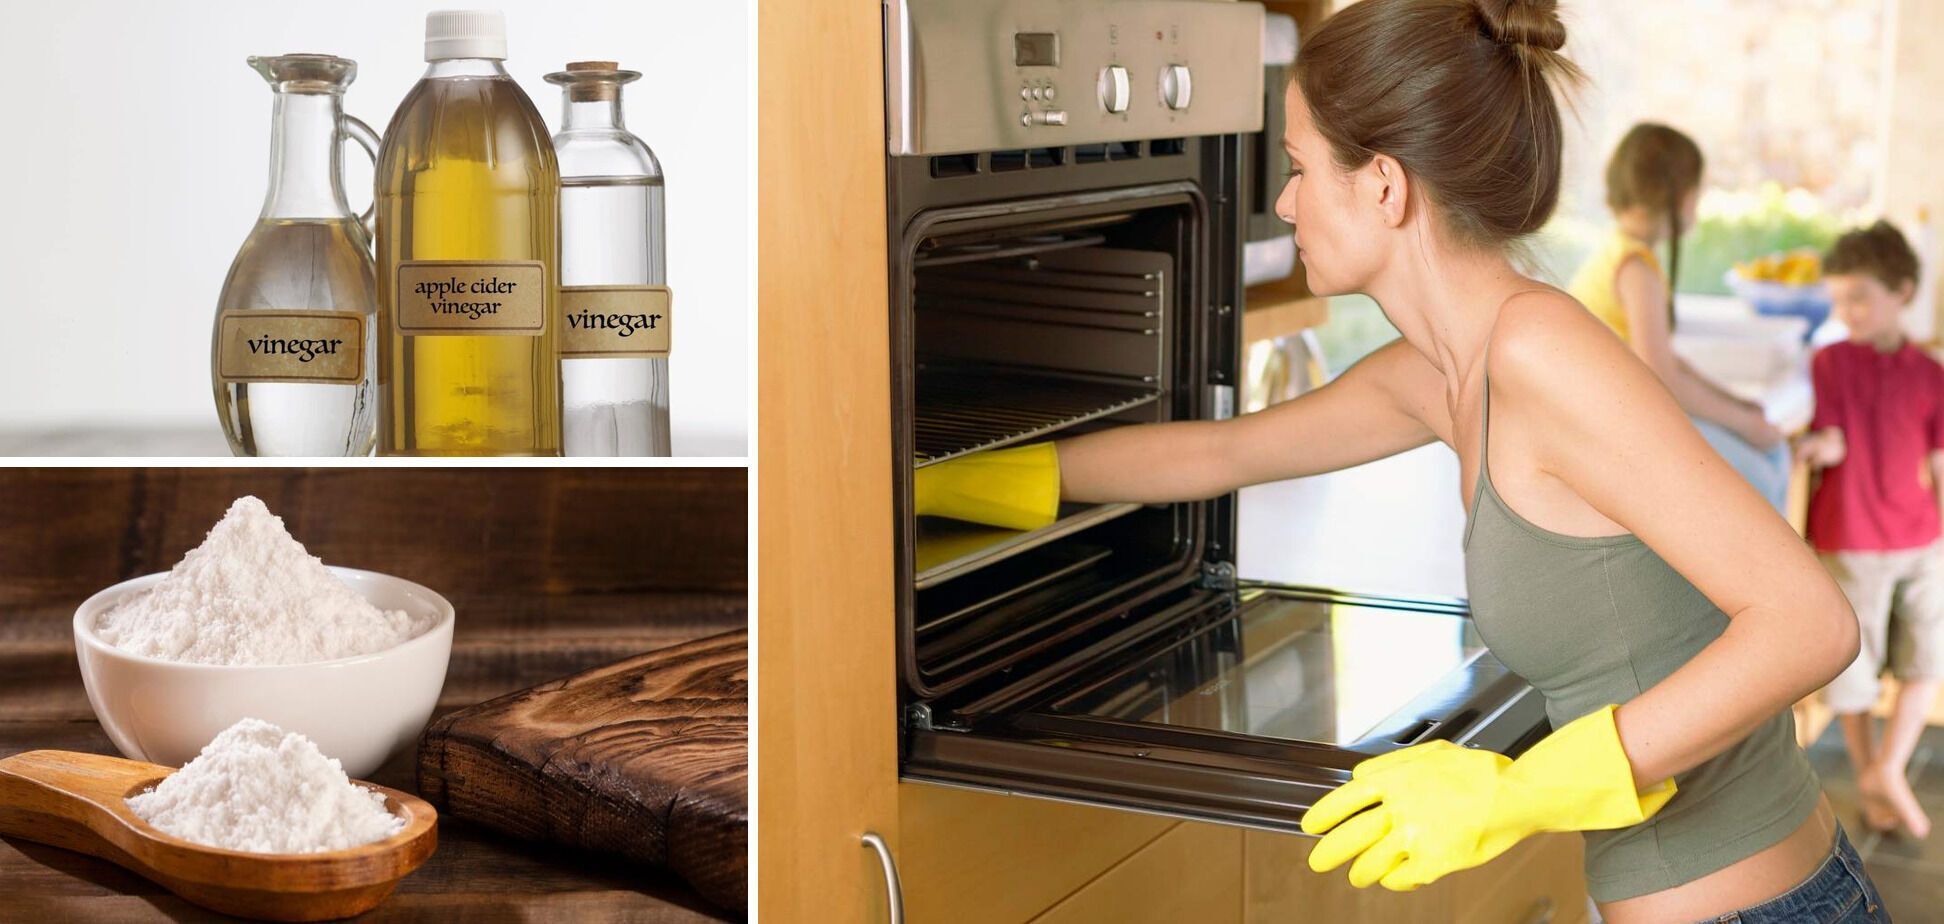 How to clean the oven with baking soda and vinegar